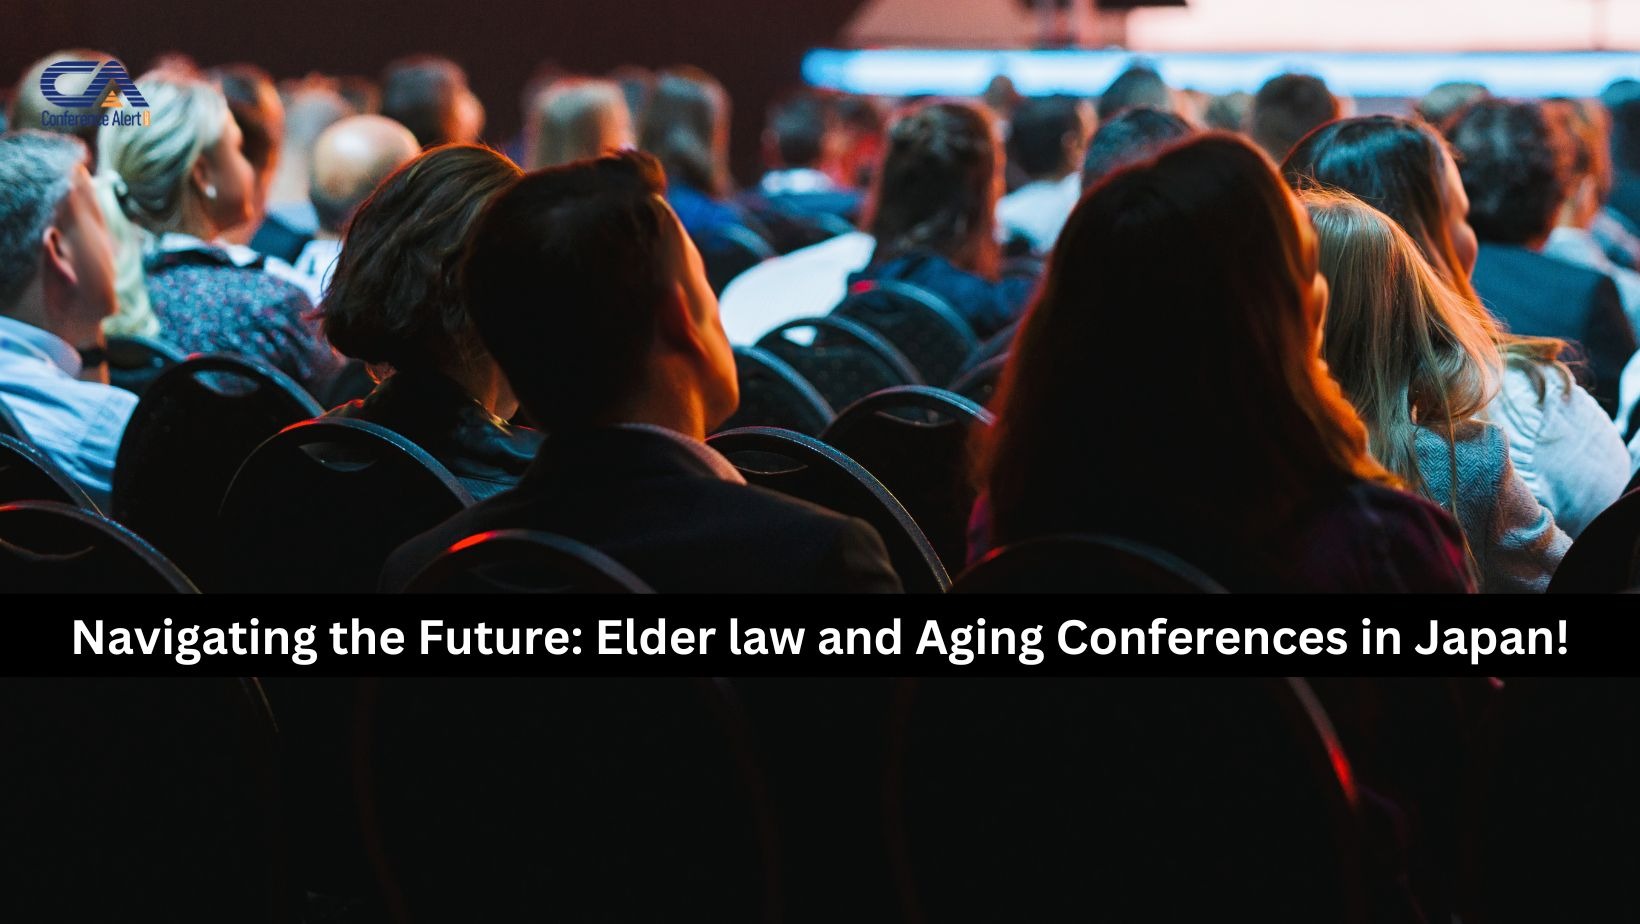 Navigating the Future: Elder law and Aging Conferences in Japan!